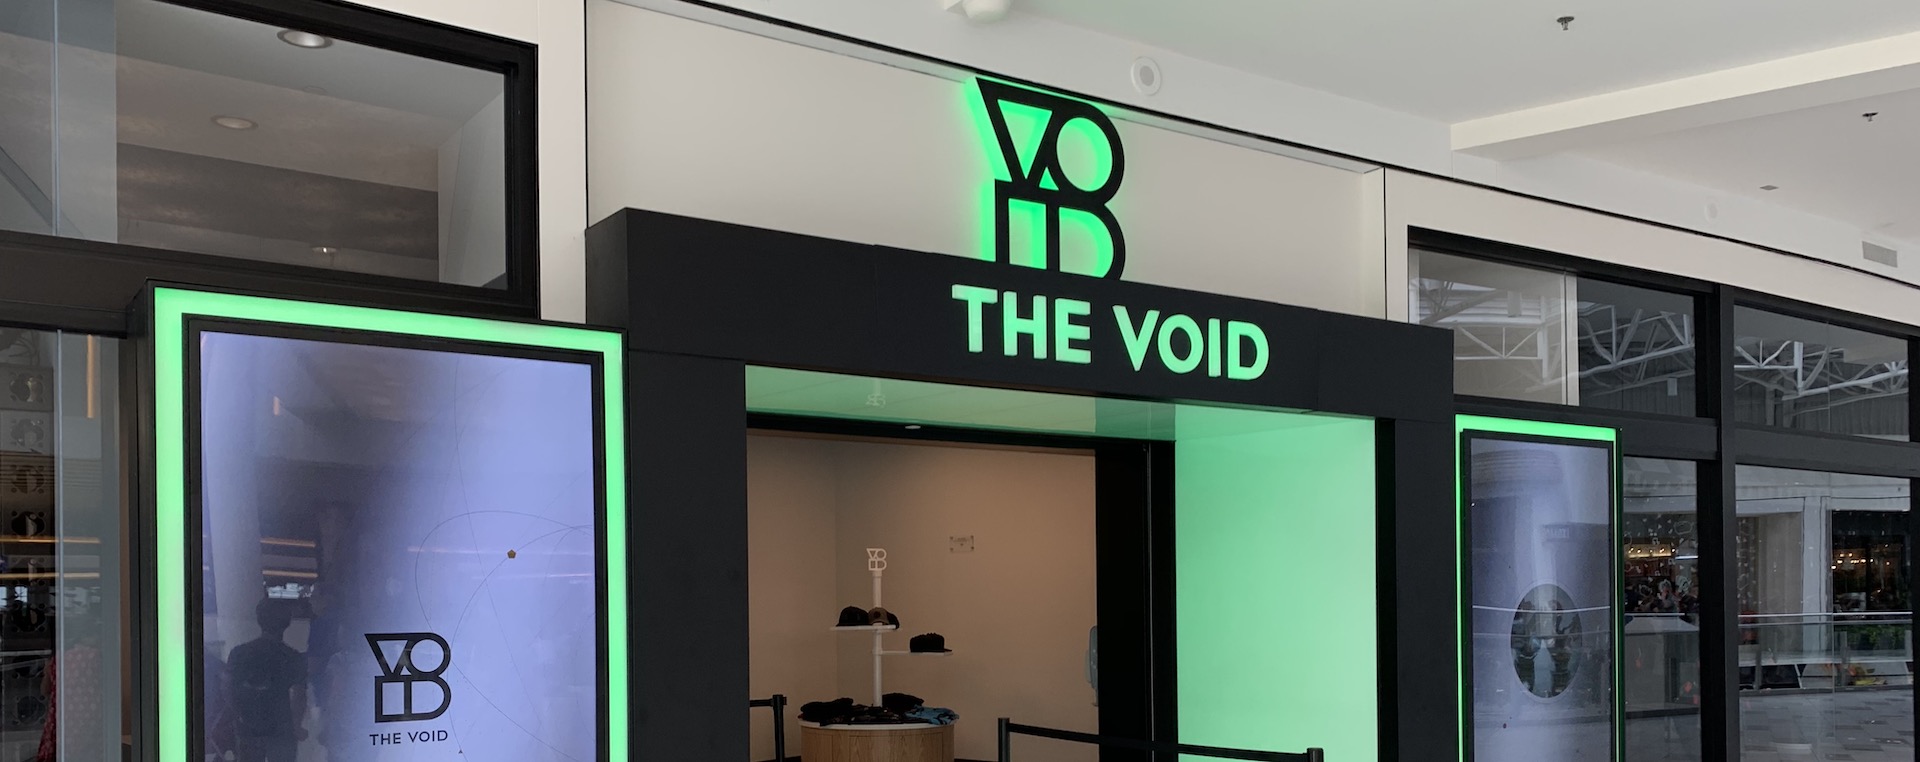 The Void VR